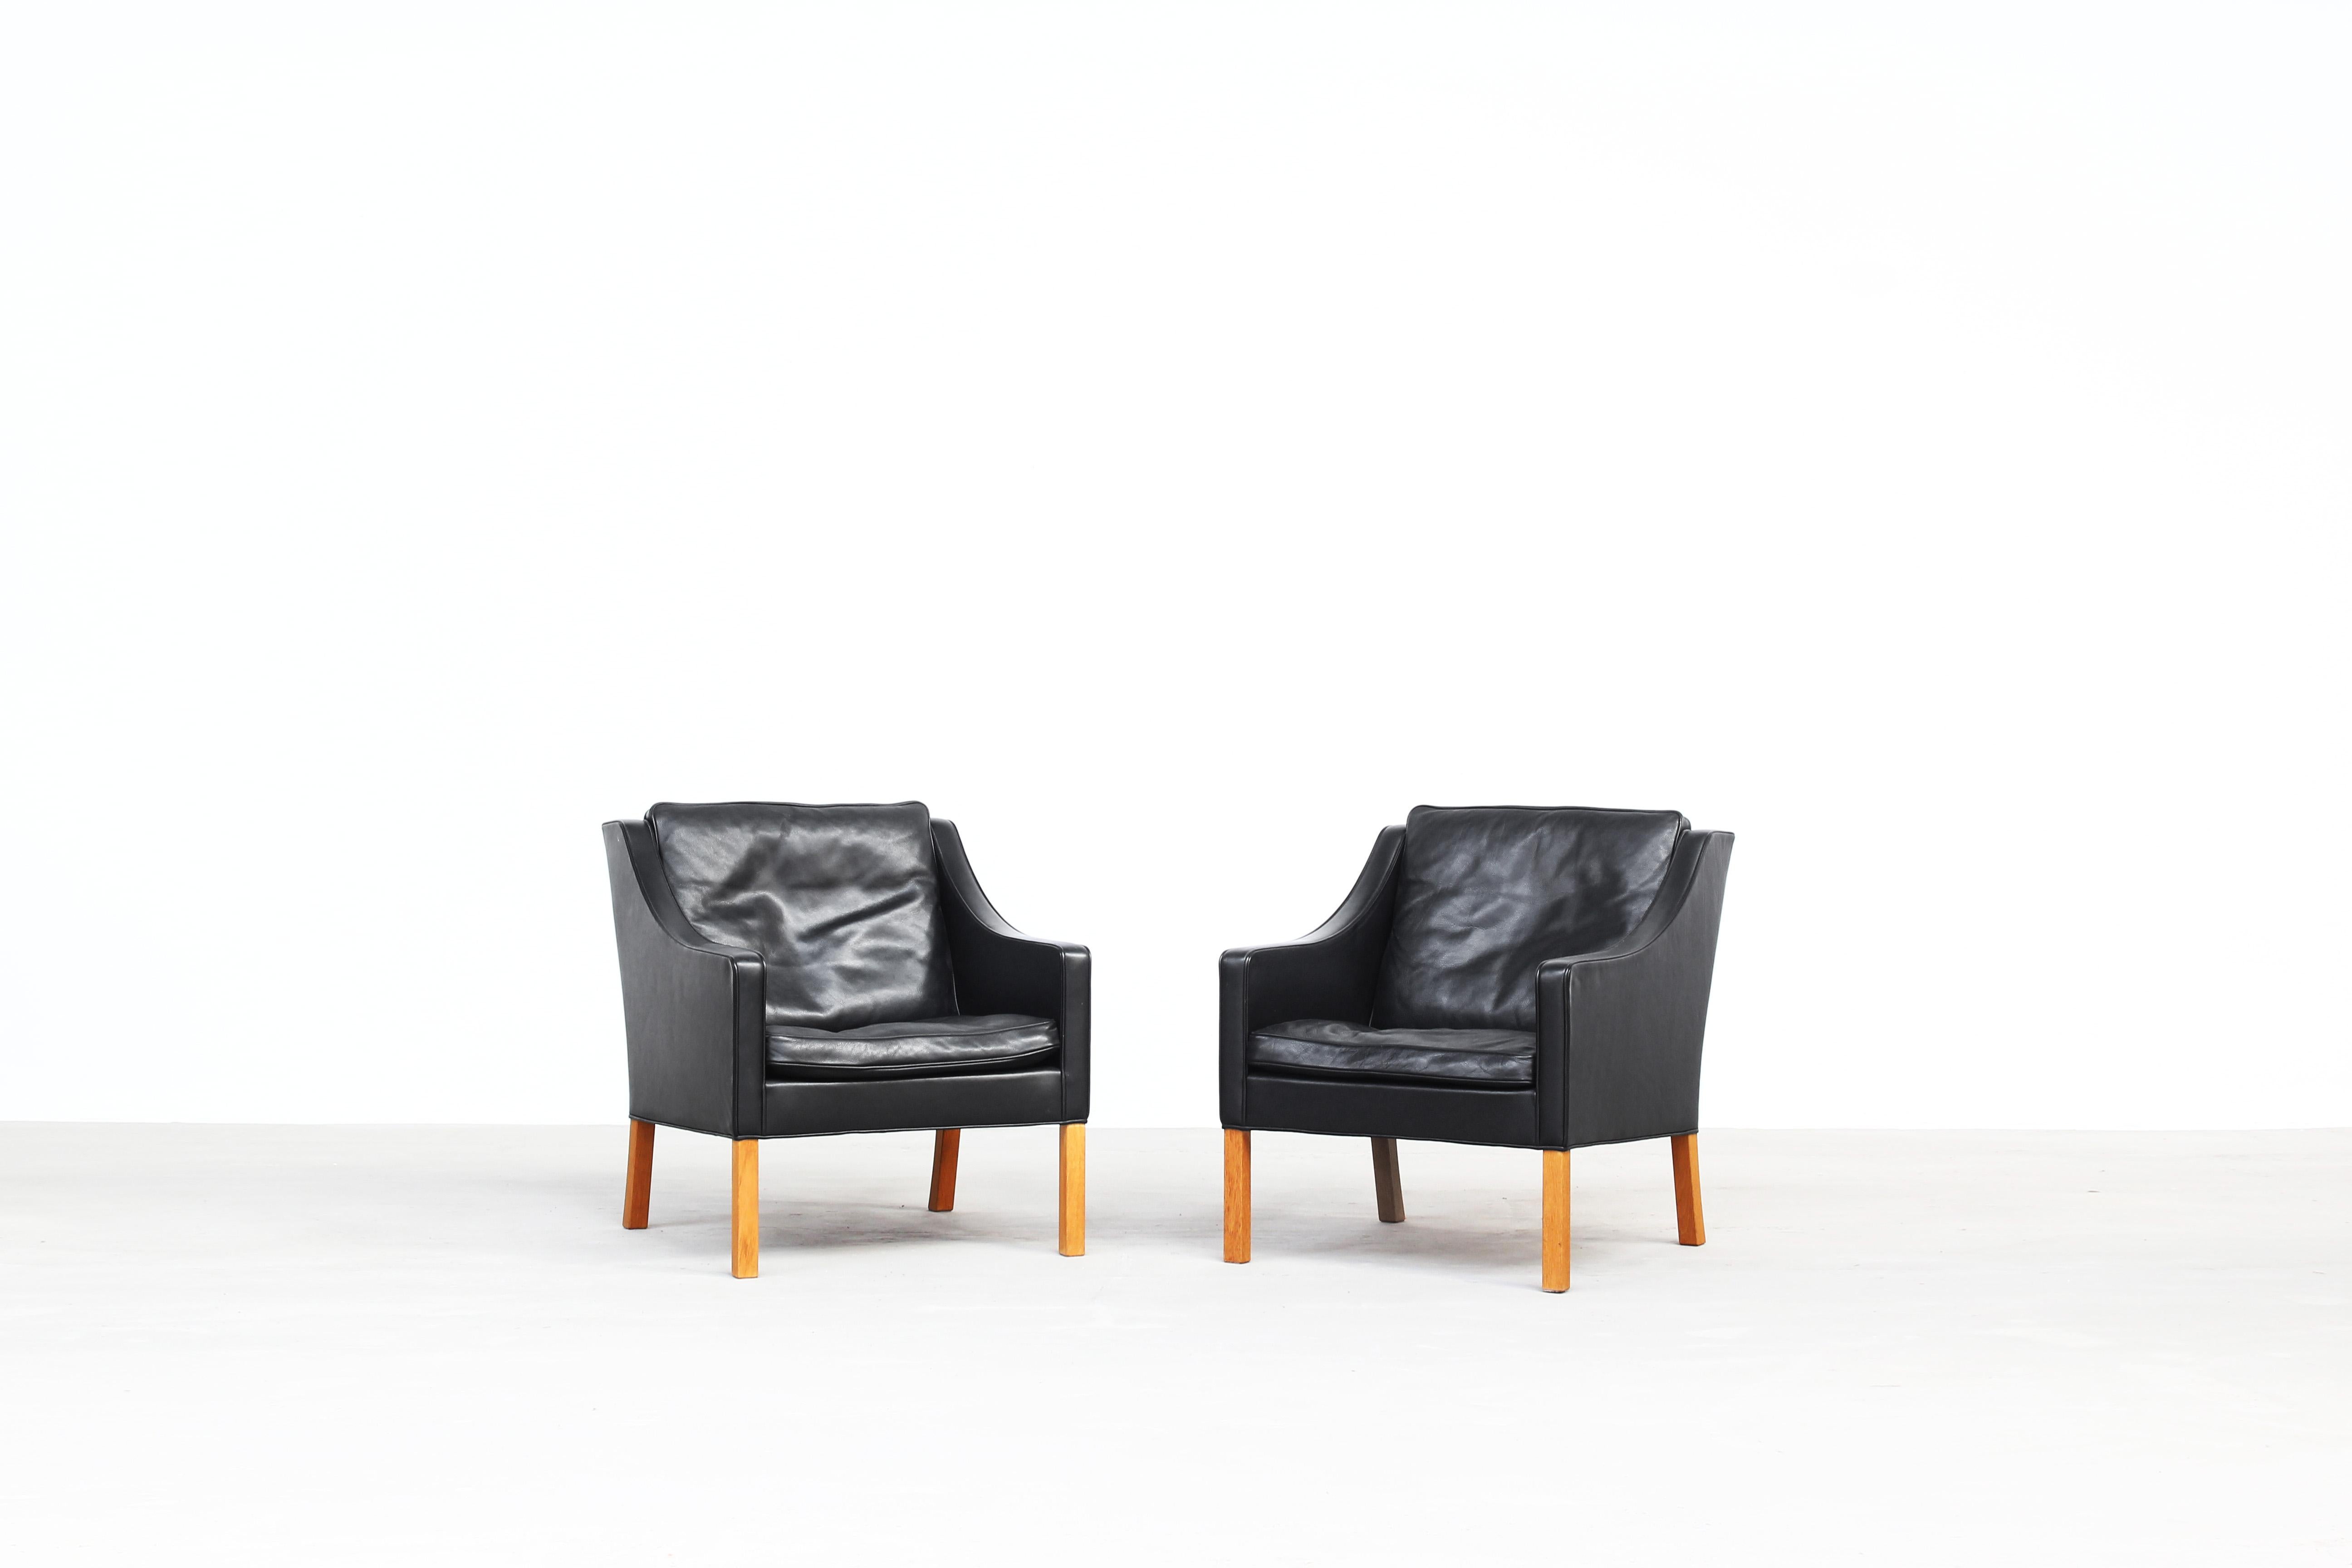 A beautiful pair of lounge chairs designed by Børge Mogensen and produced by Fredericia Stolefabrik in Denmark.
Both chairs come with a great black leather and oak legs, both are in a beautiful condition with just little traces of usage. Labeled